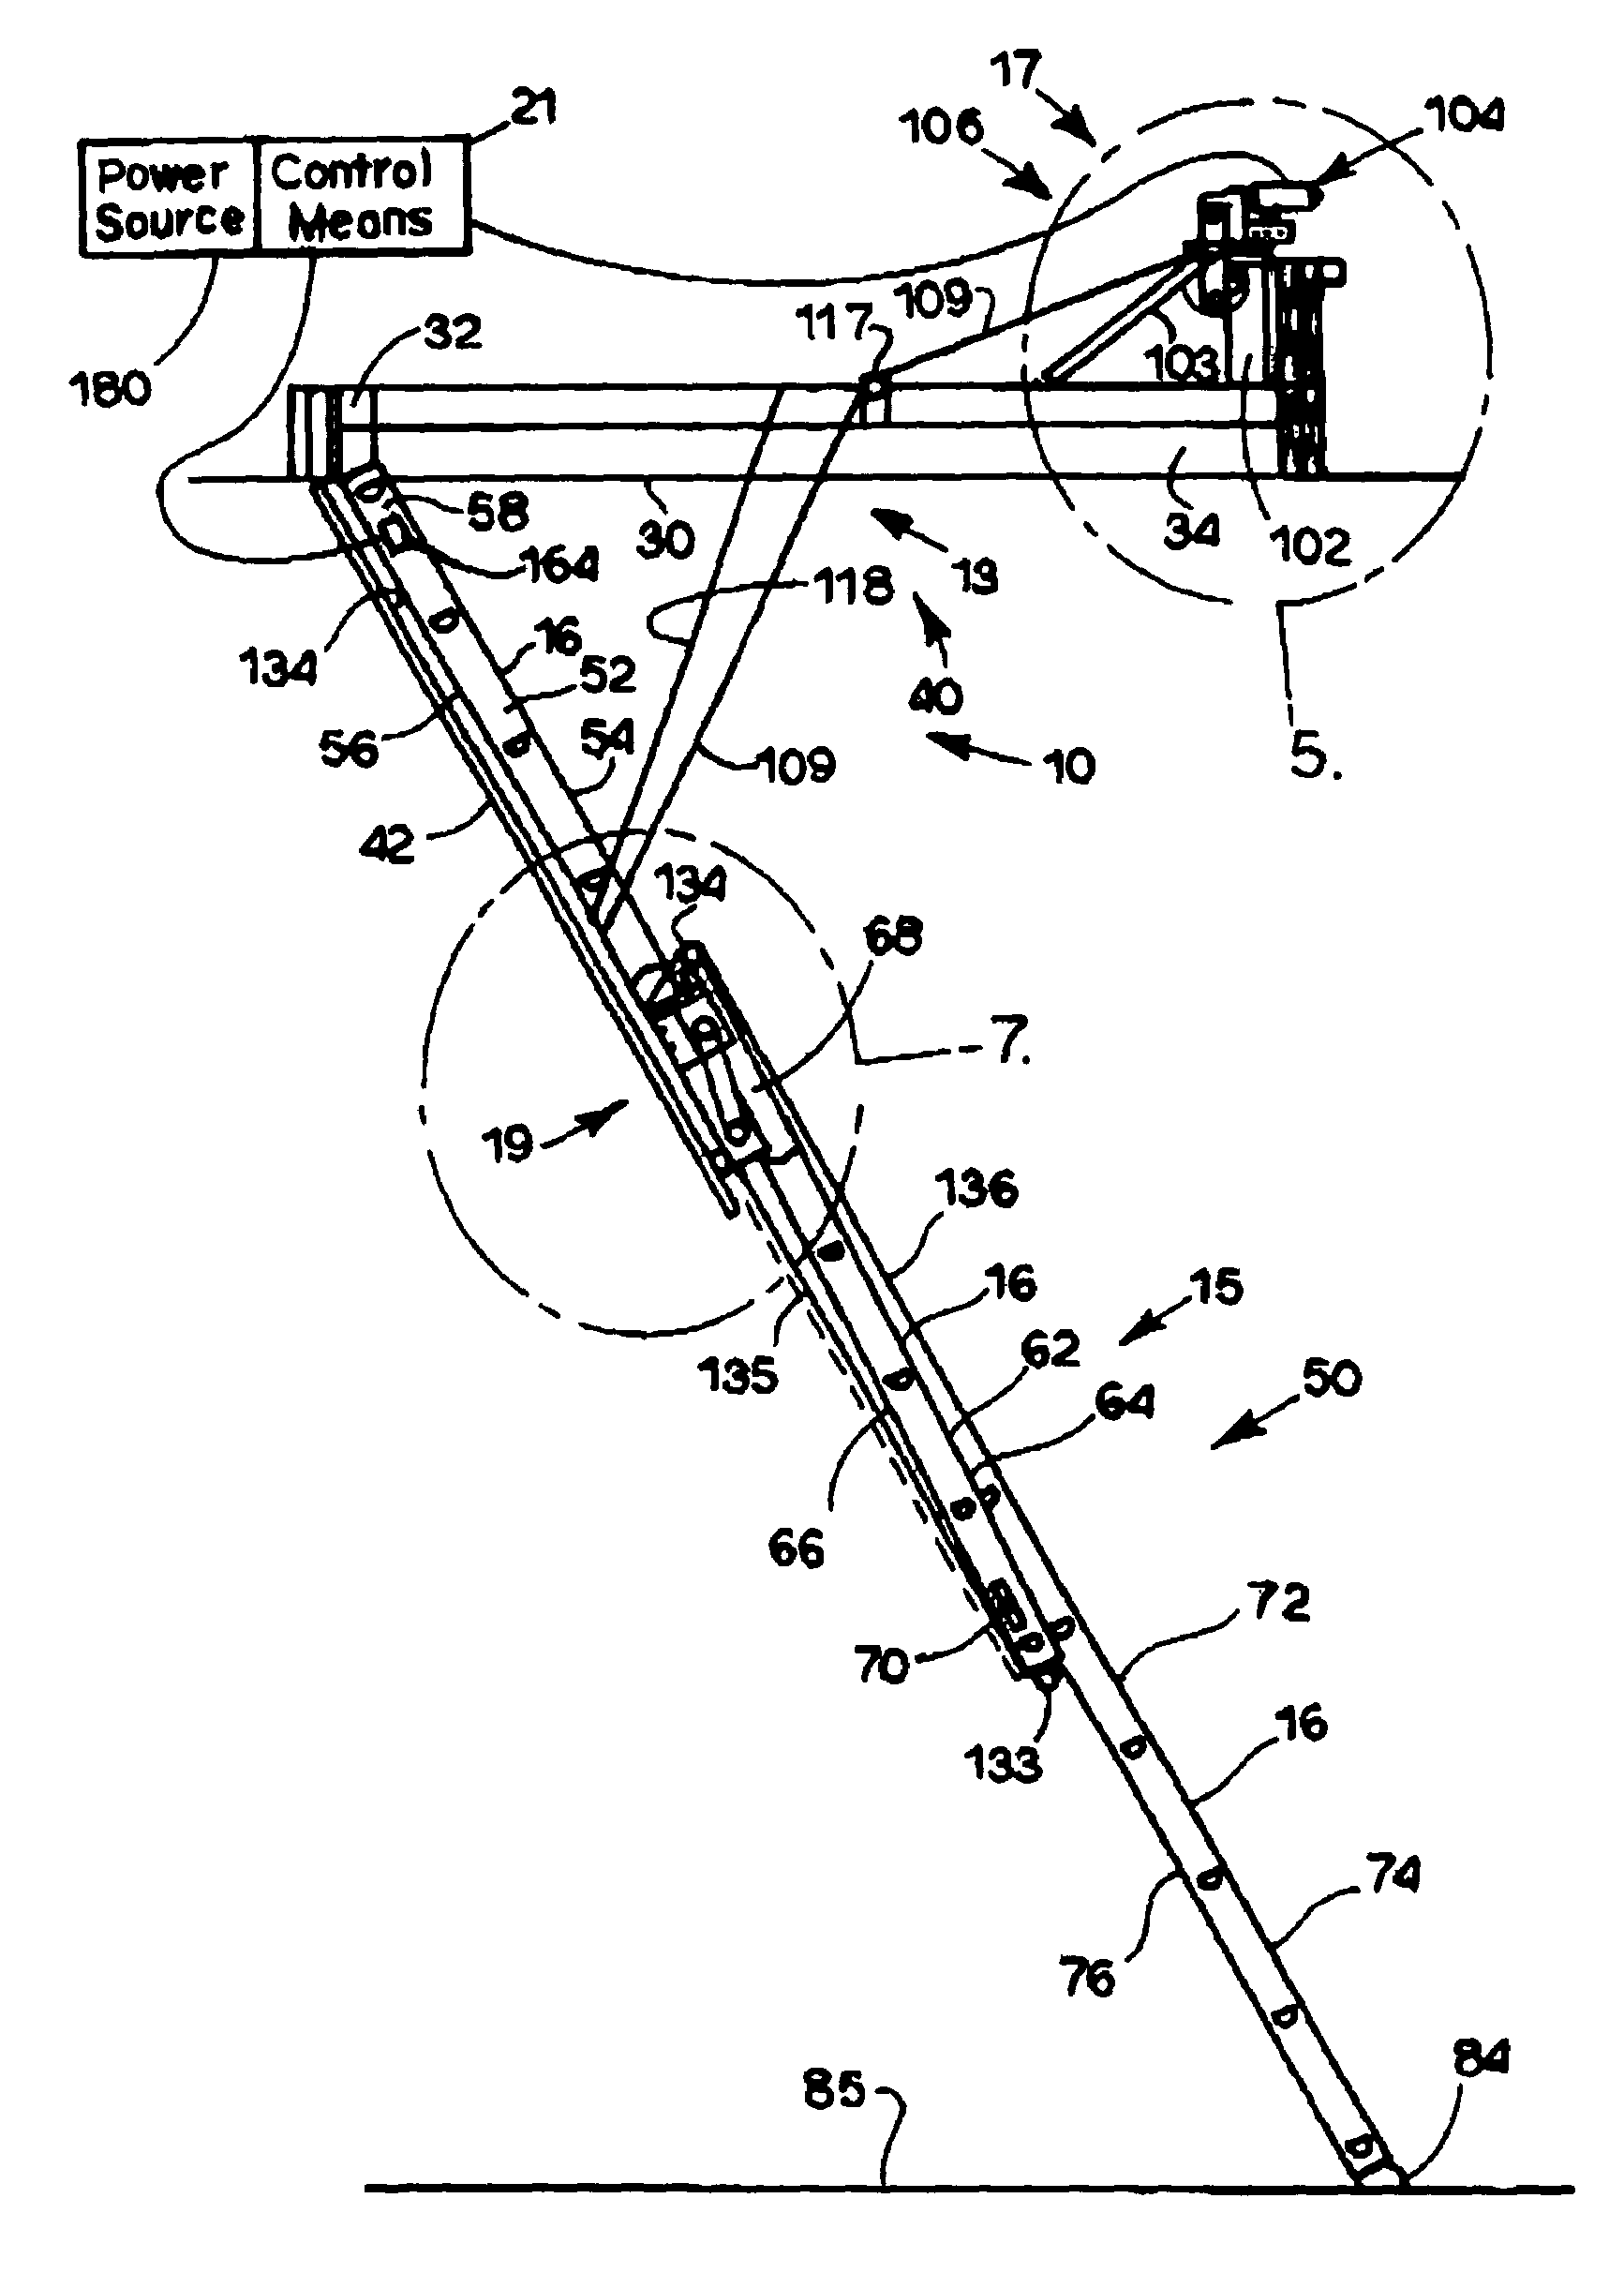 Motorized access ladder for elevated areas